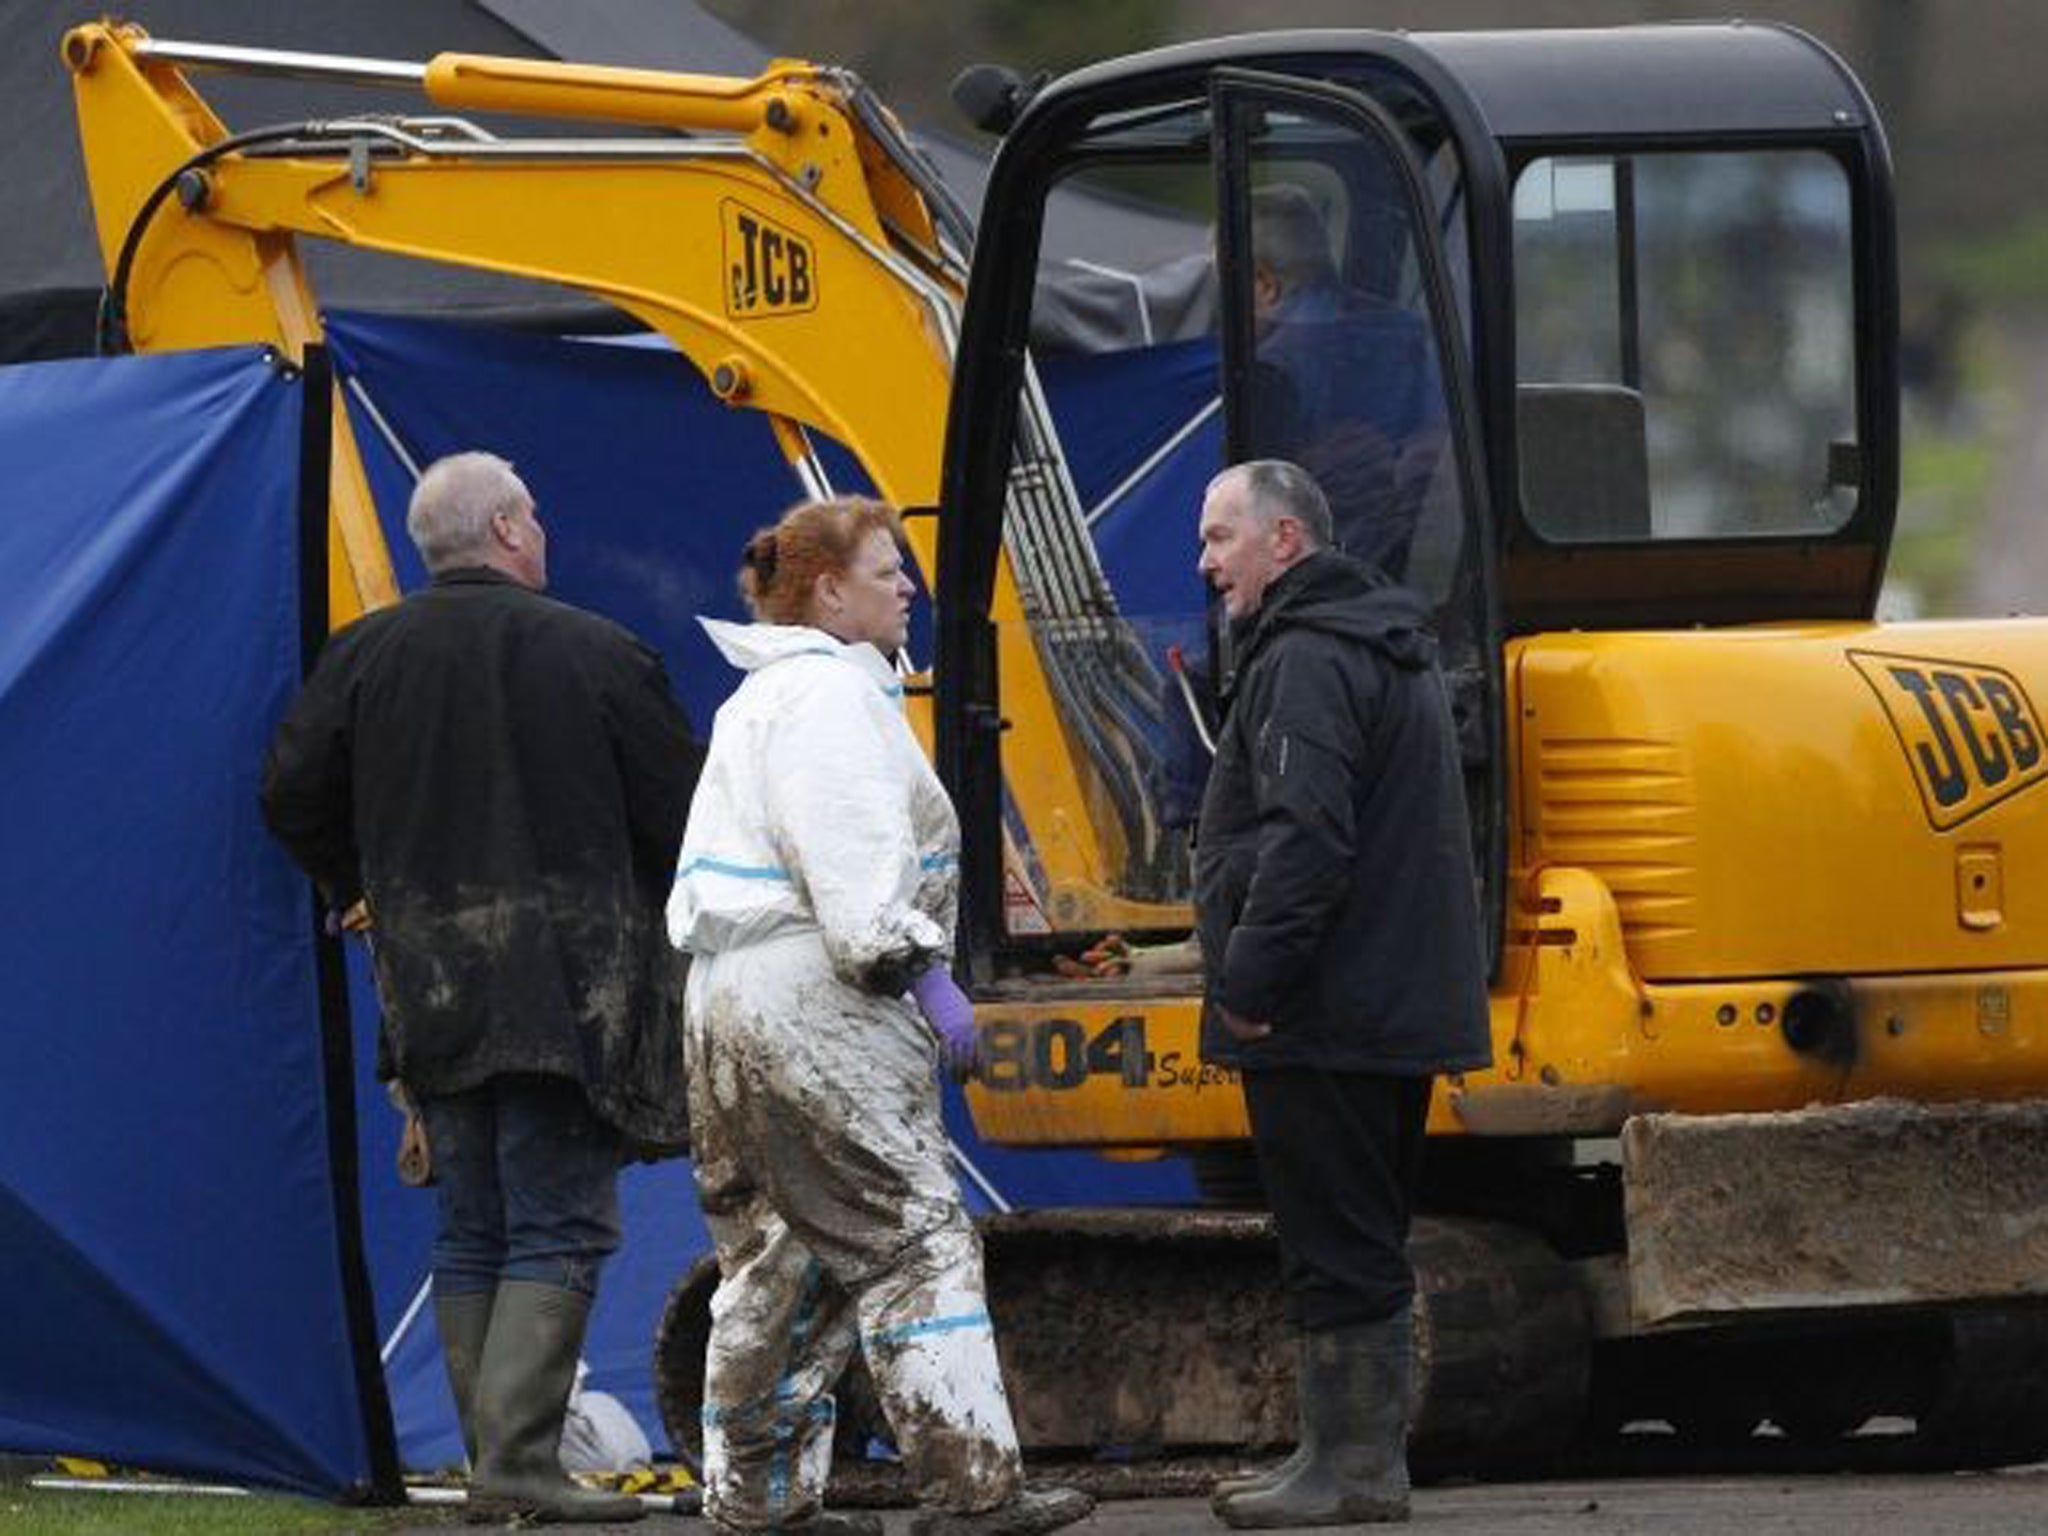 Forensic anthropologist Sue Black speaks with colleagues during the exhumation